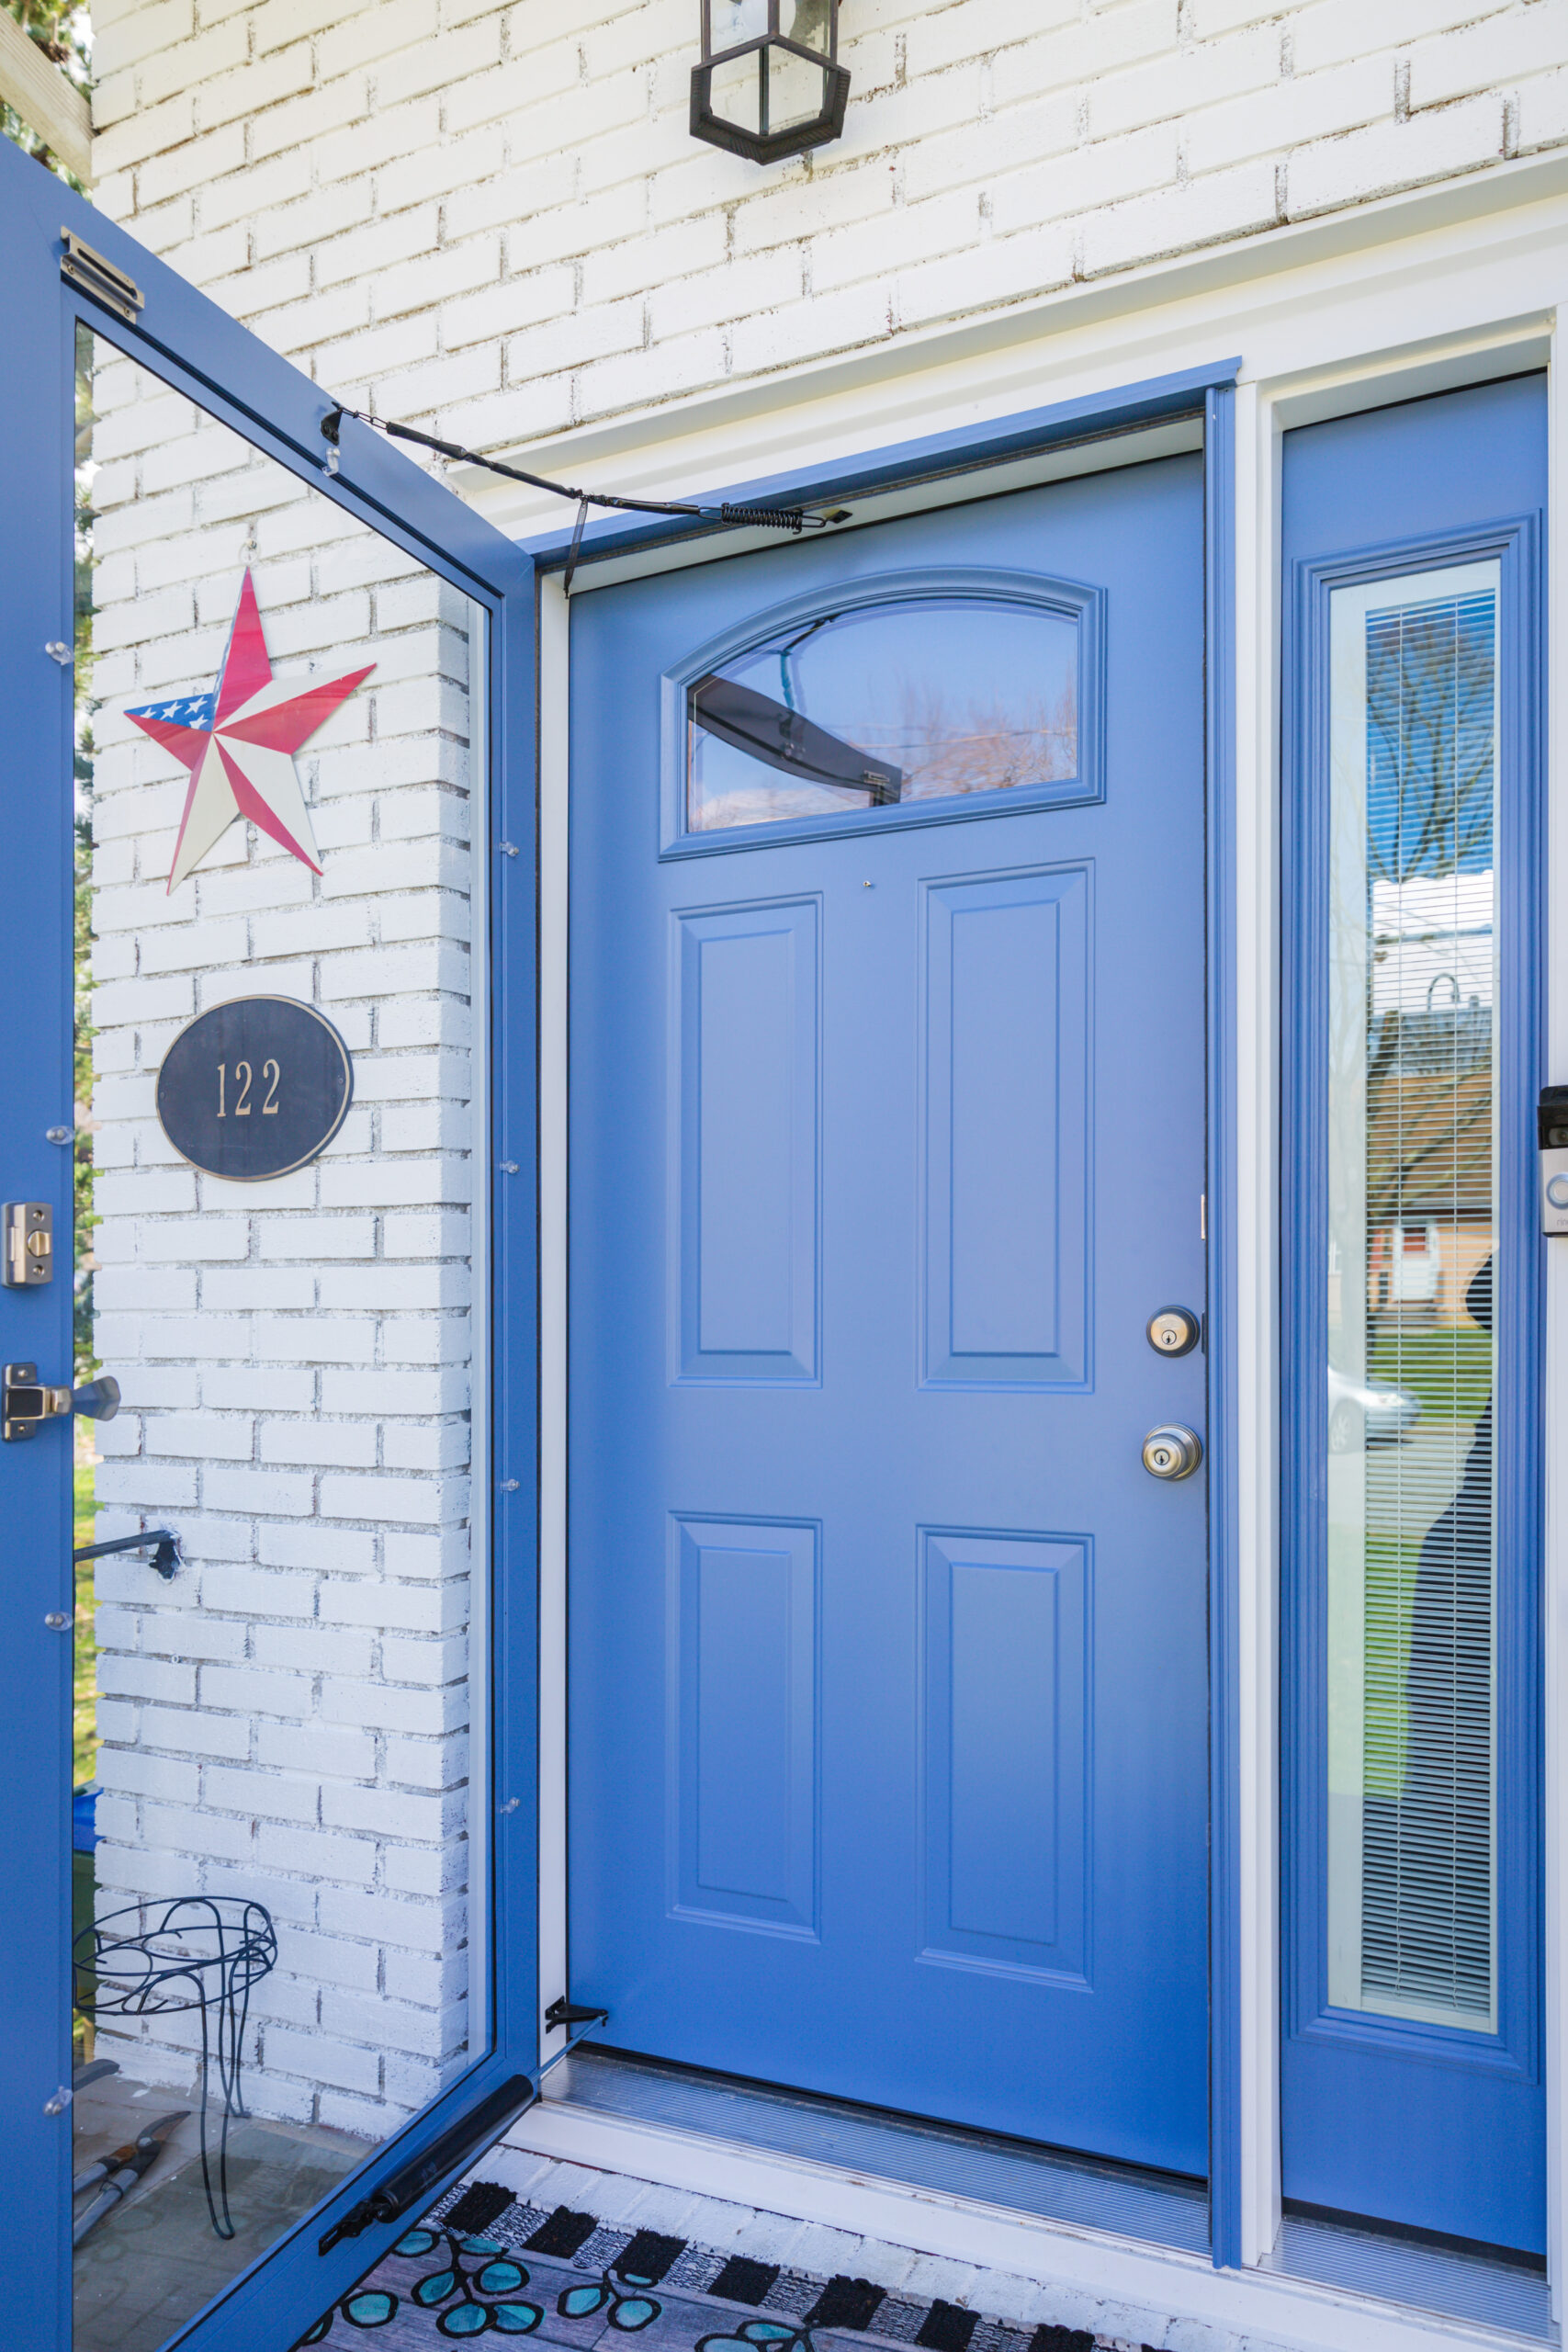 A blue door with a star on it.